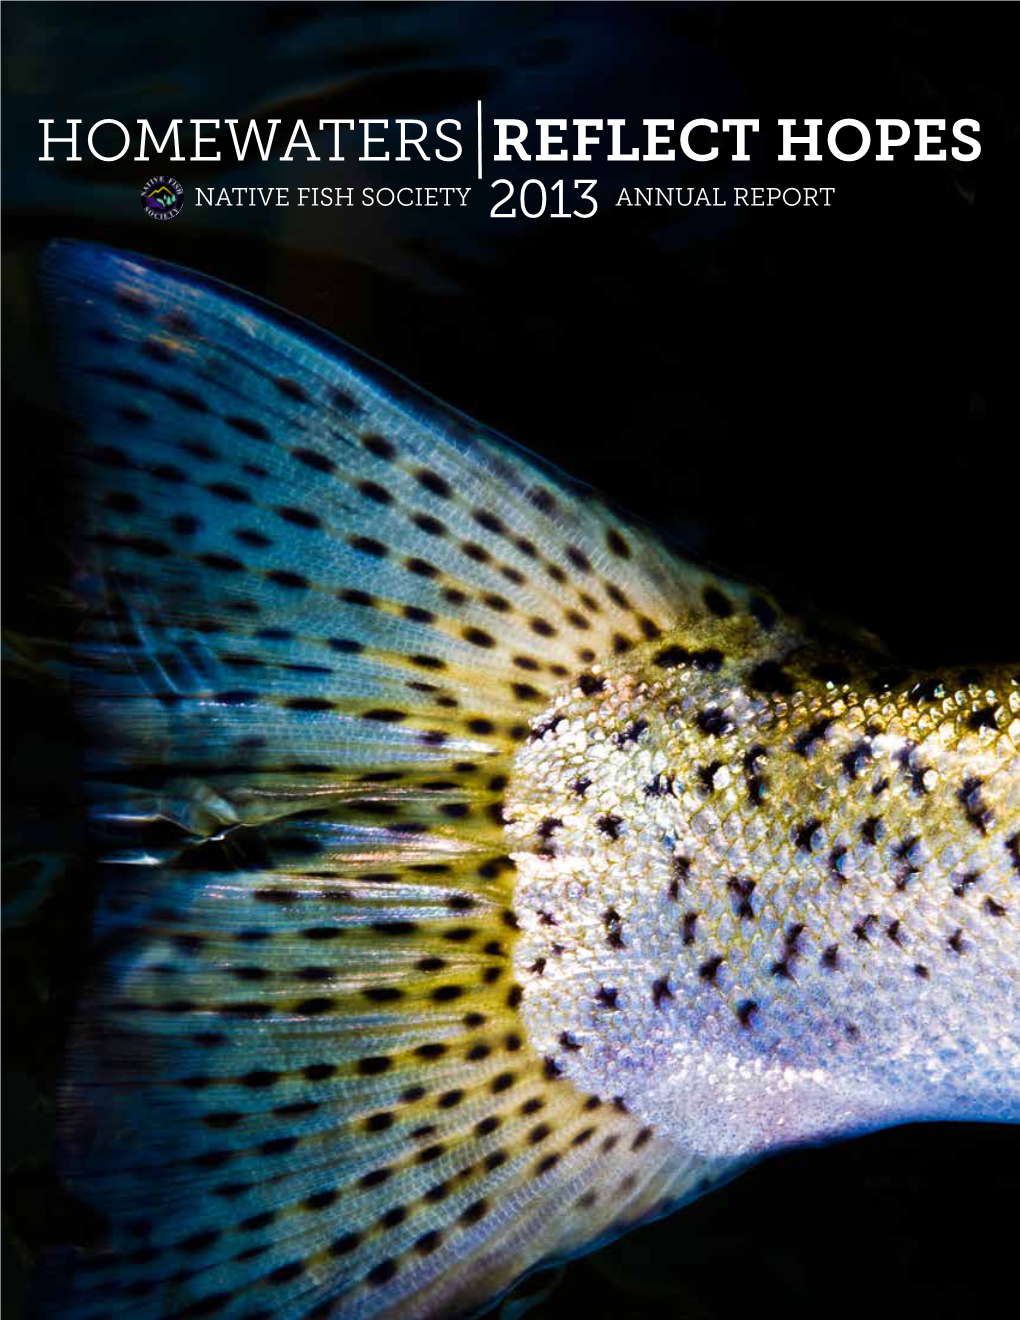 Homewaters Reflect Hopes Native Fish Society 2013 Annual Report